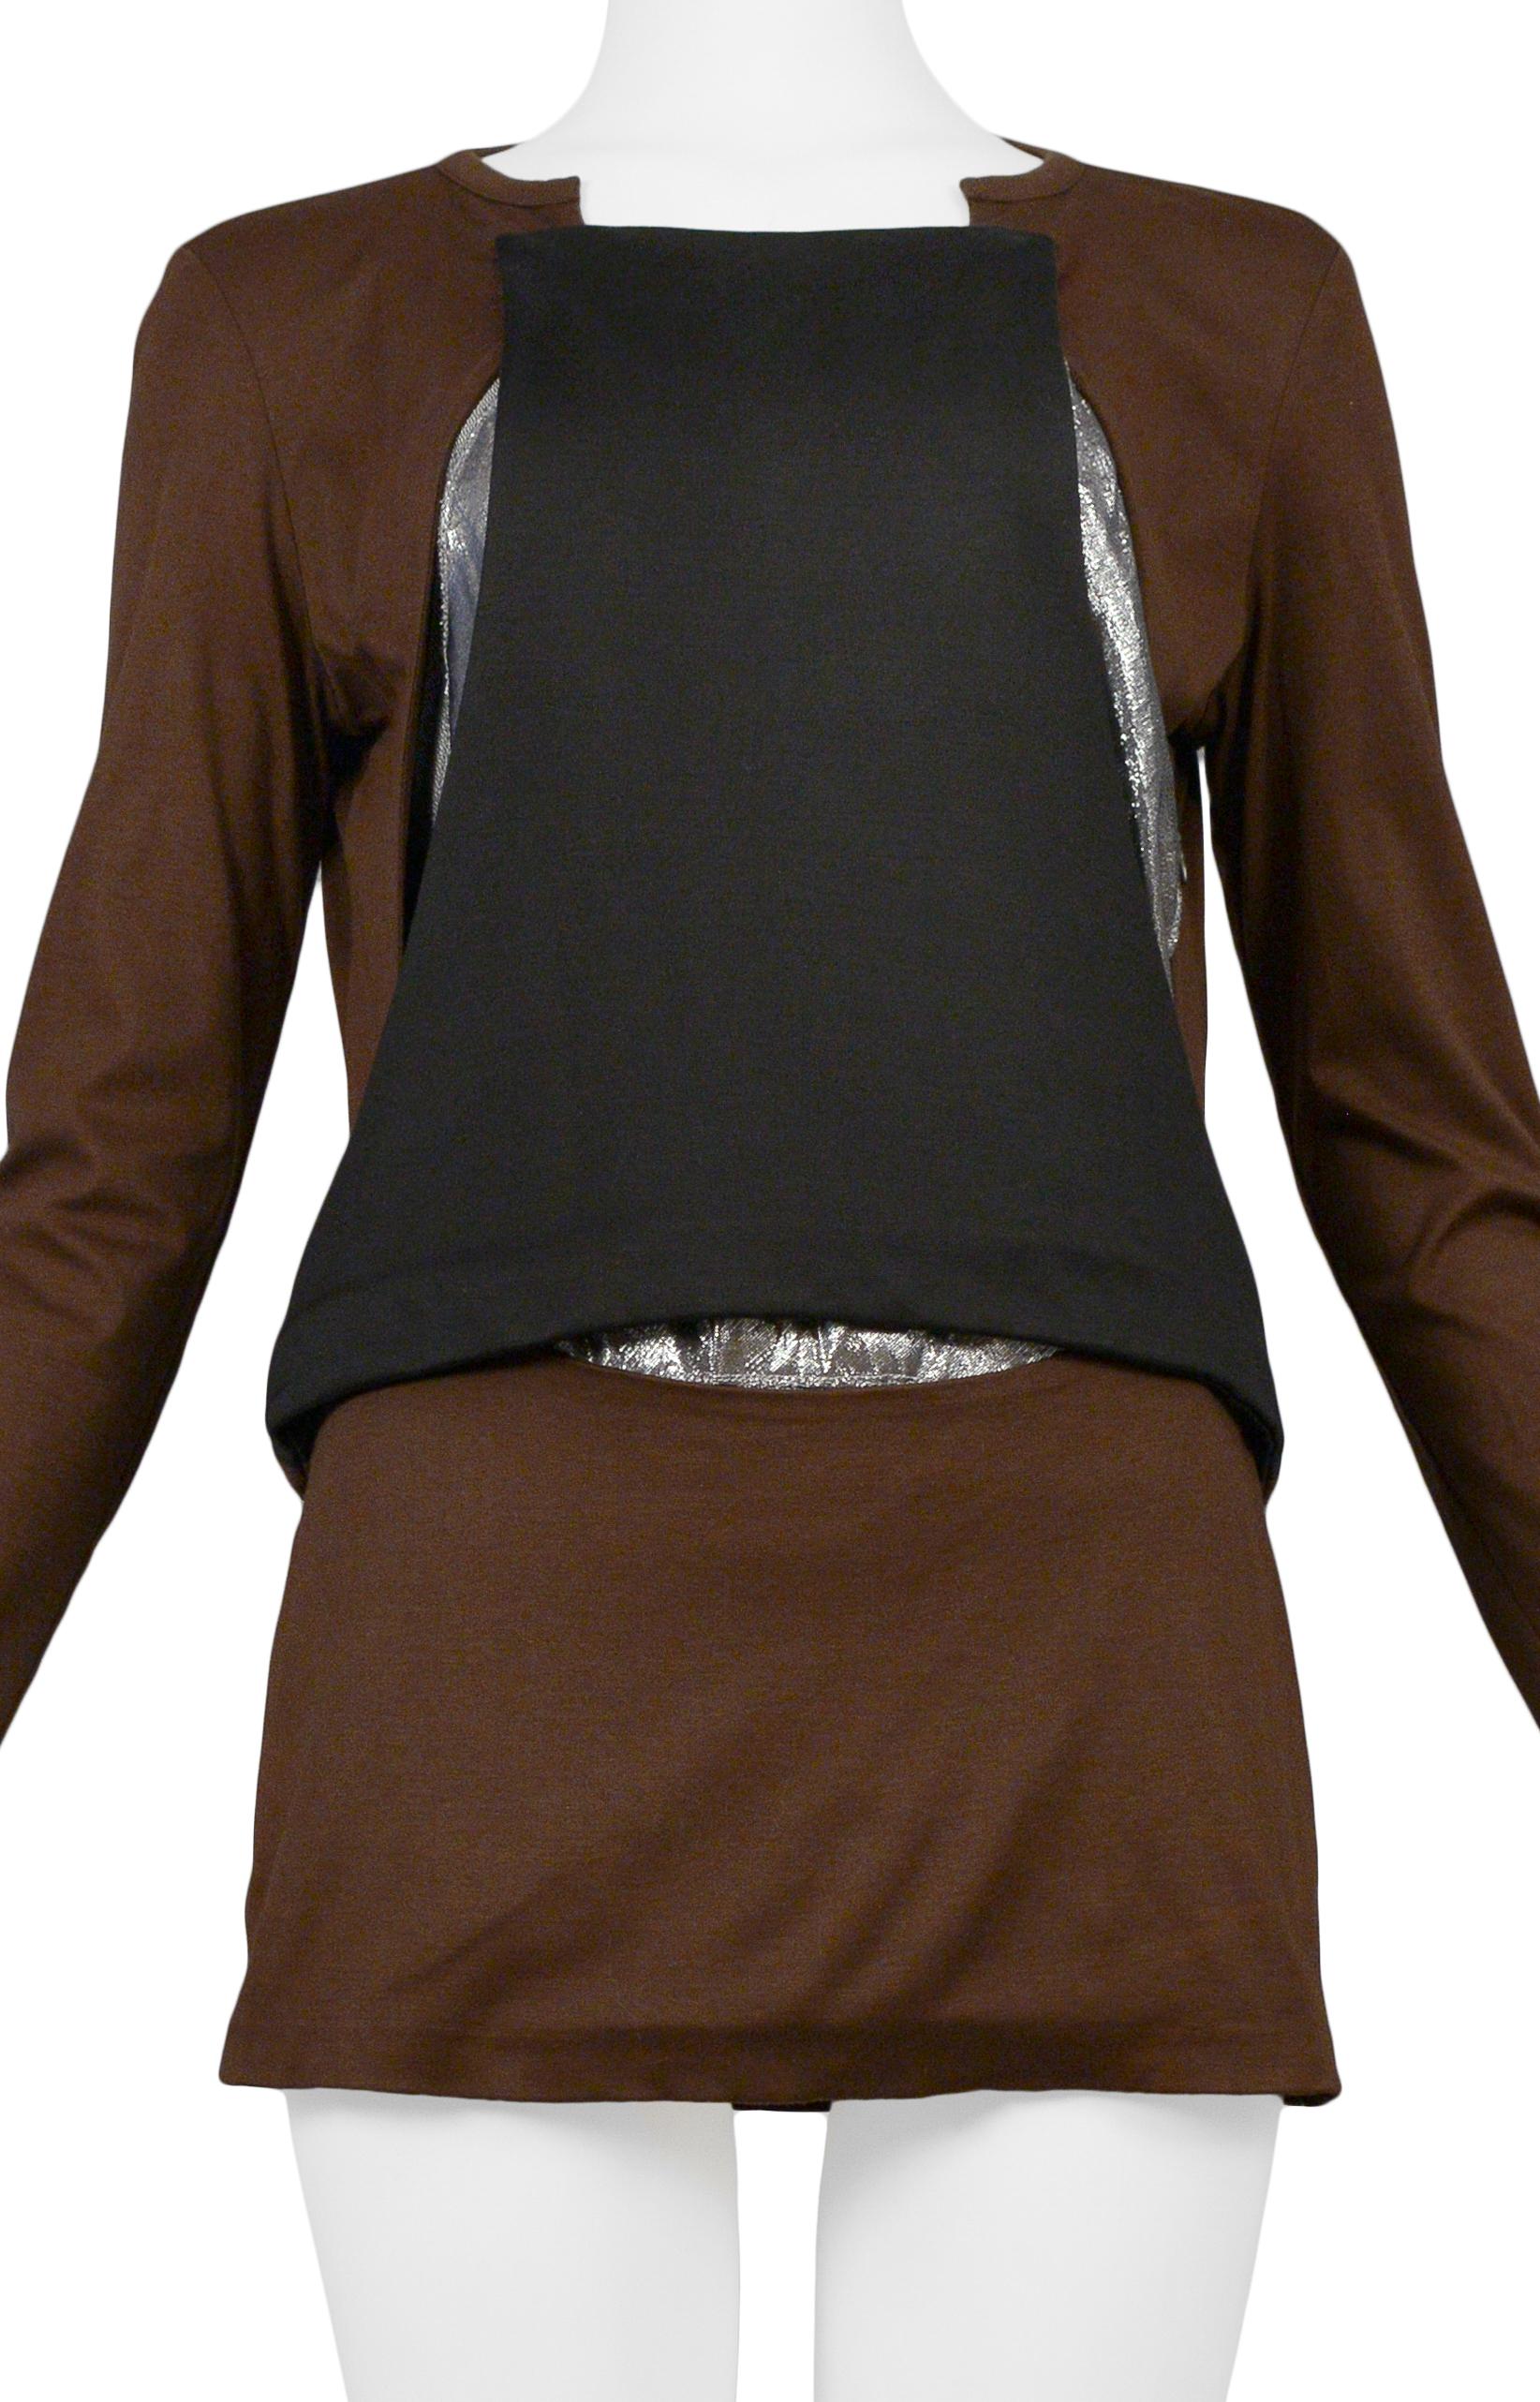 Helmut Lang Brown Black & Silver Inset Tunic In Excellent Condition For Sale In Los Angeles, CA